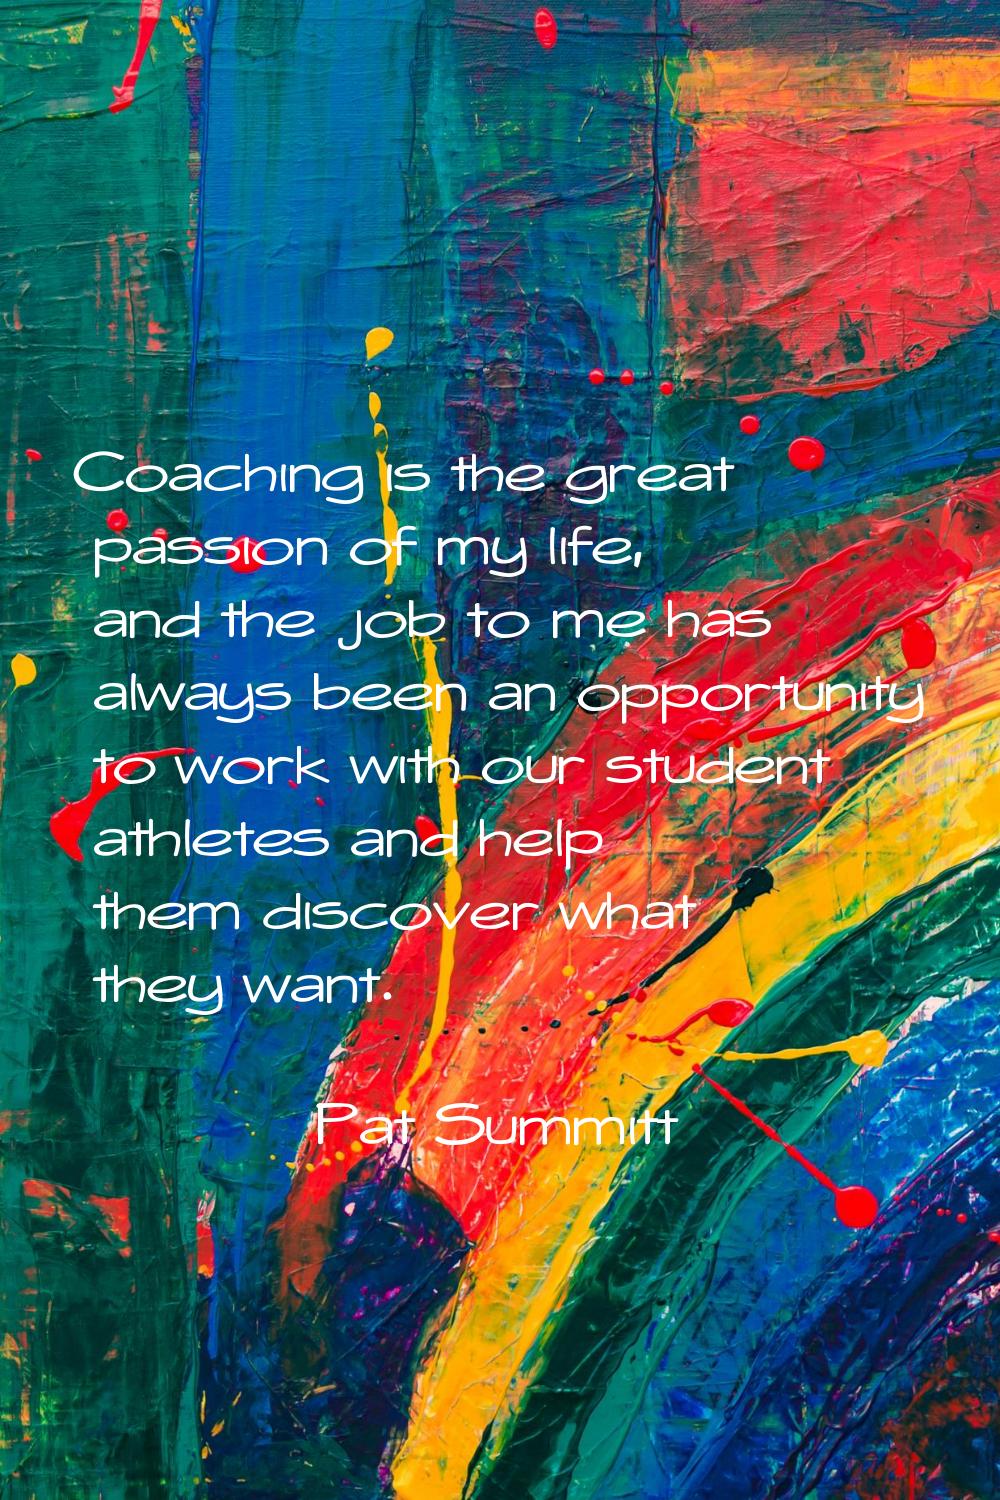 Coaching is the great passion of my life, and the job to me has always been an opportunity to work 